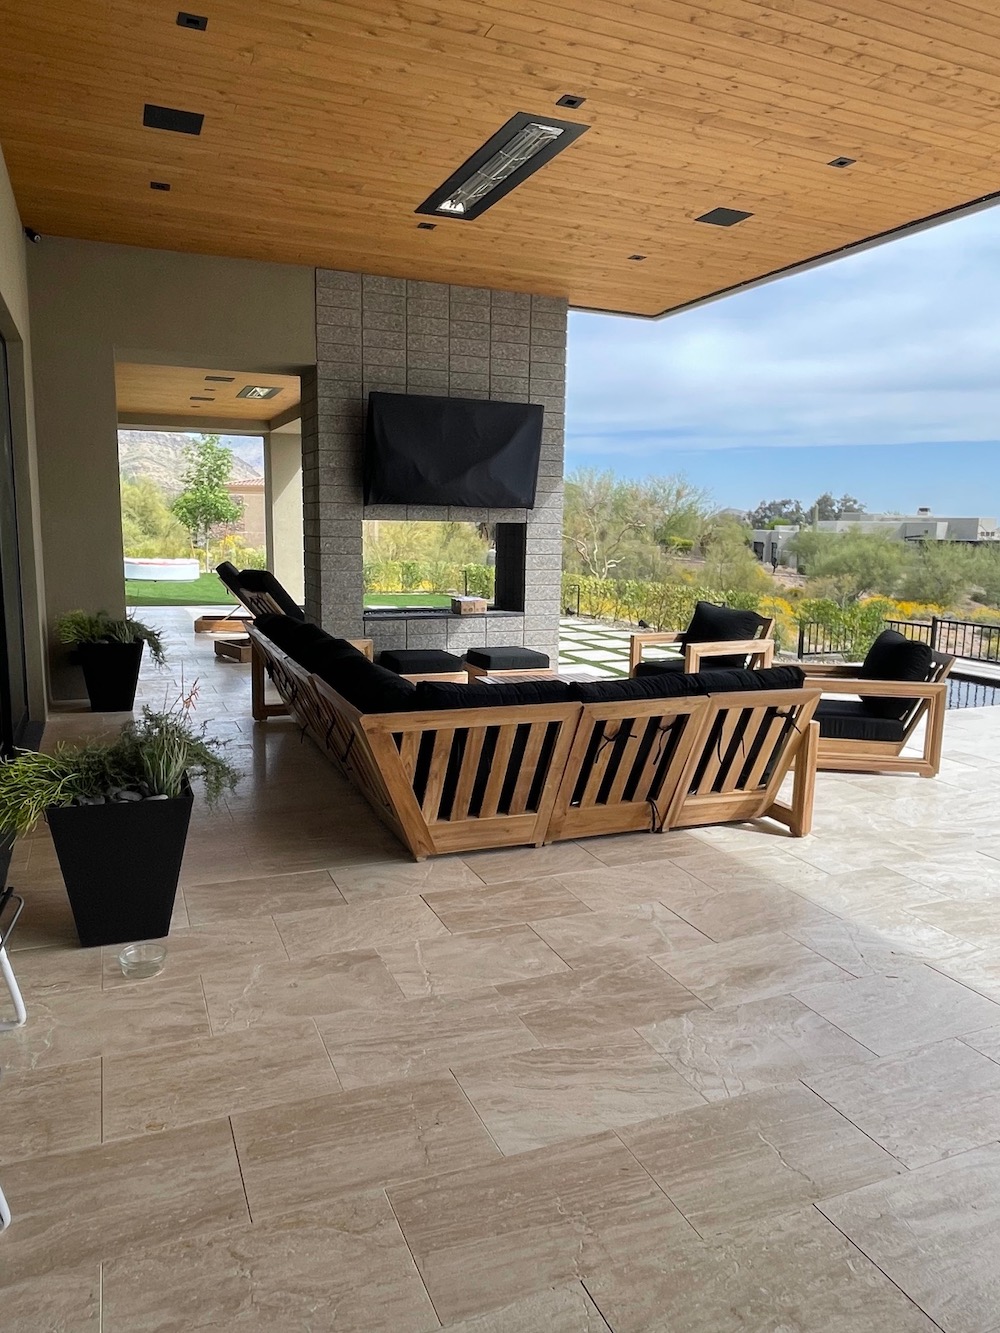 Teak outdoor sectional seating with dark cushions by Willow Creek under a covered patio, perfect for entertaining, in Los Angeles, California.